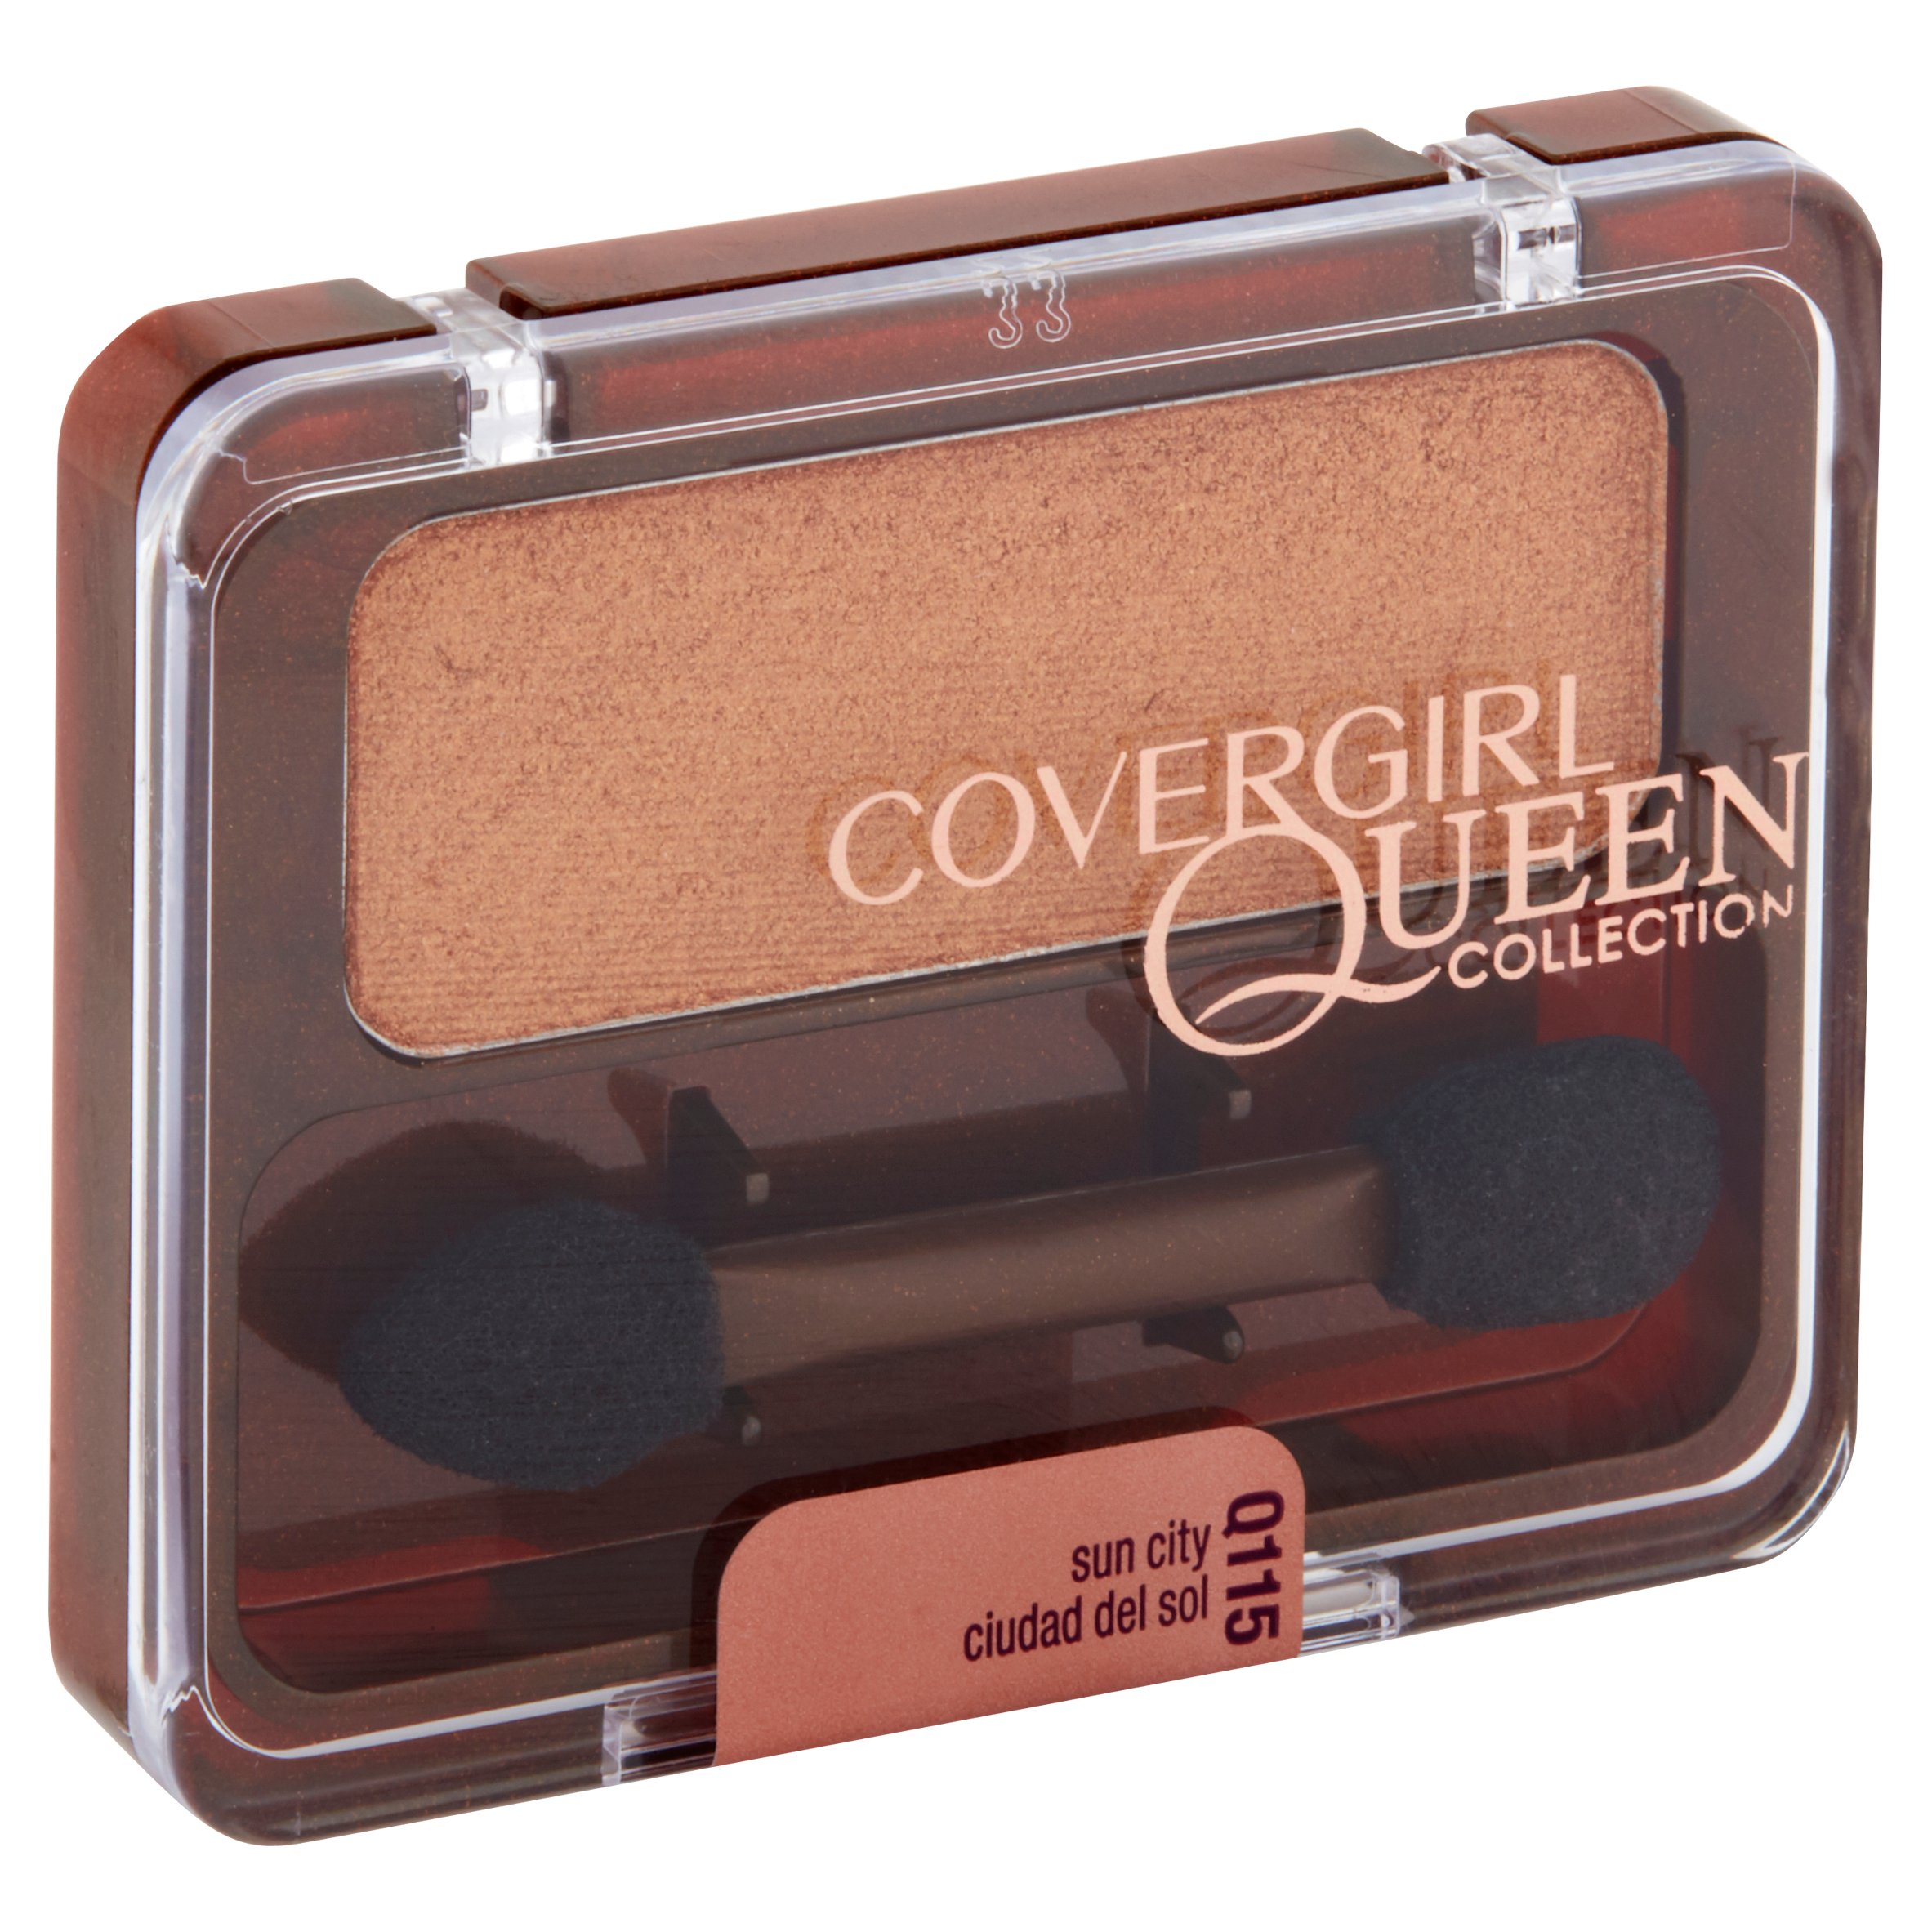 COVERGIRL Queen Collection Eye Shadow Kit, Q115 Sun City - image 2 of 4